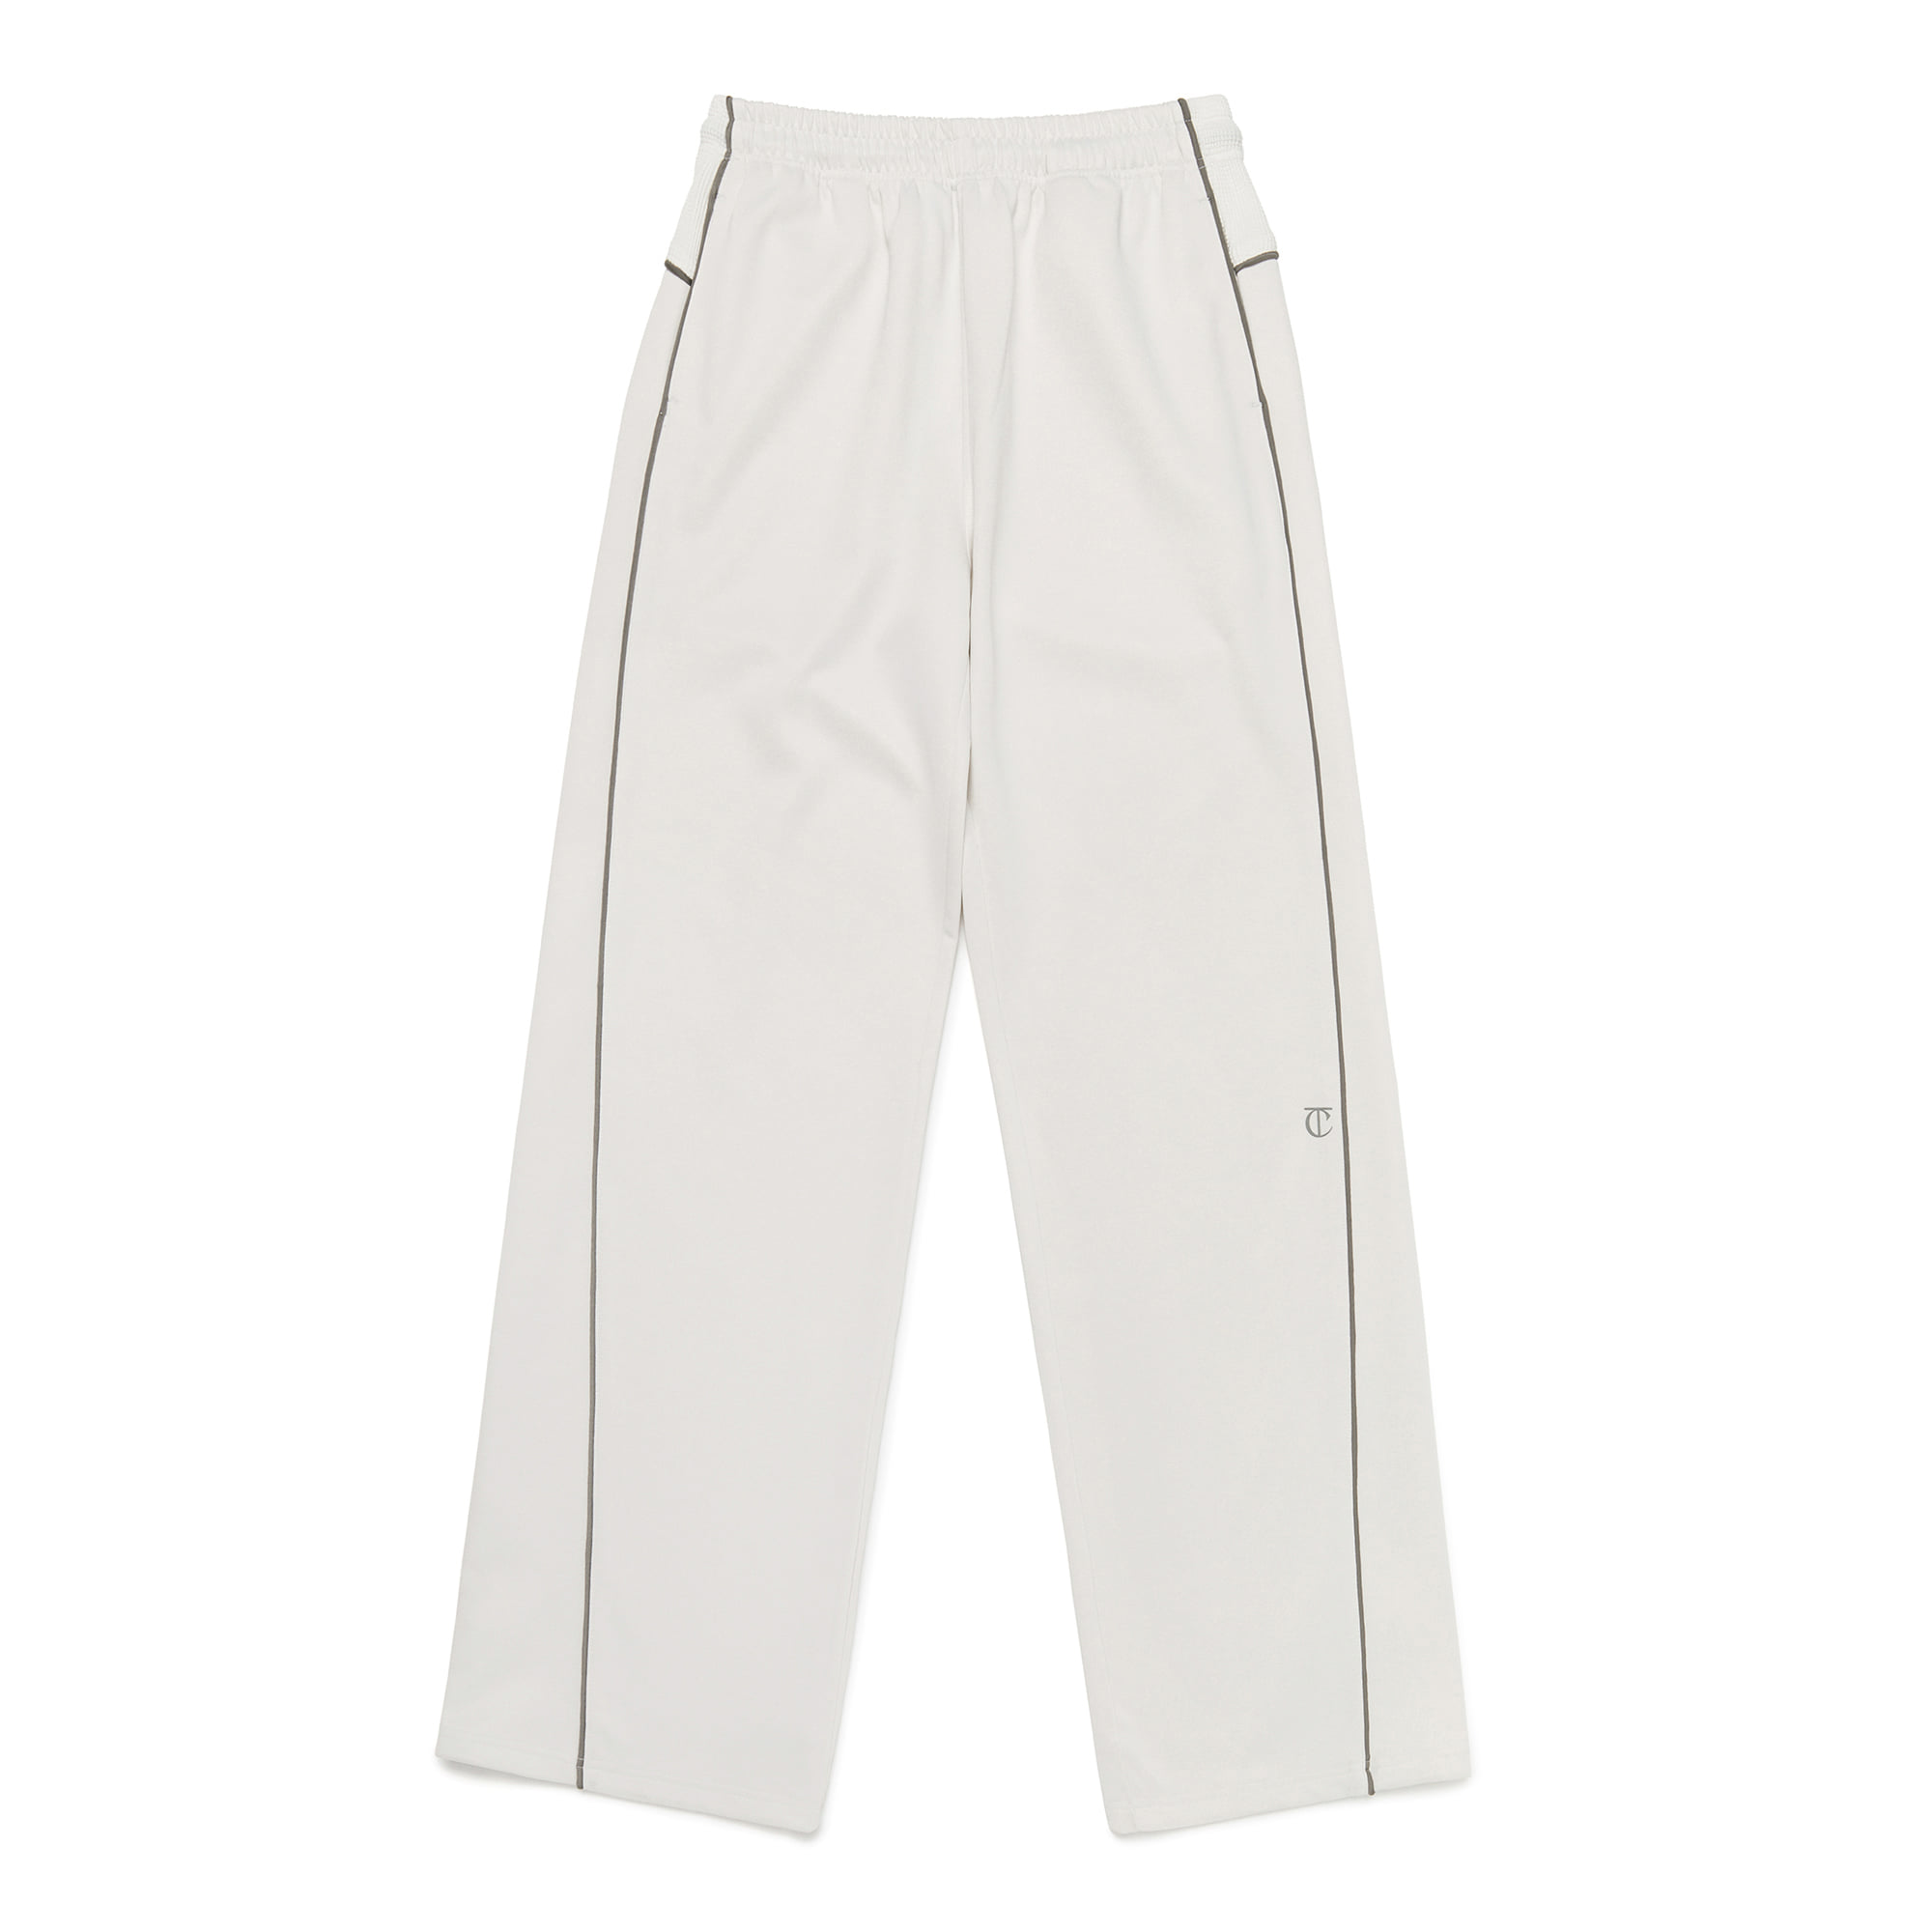 ASSYMETRIC TRACK PANTS [OFF WHITE]		